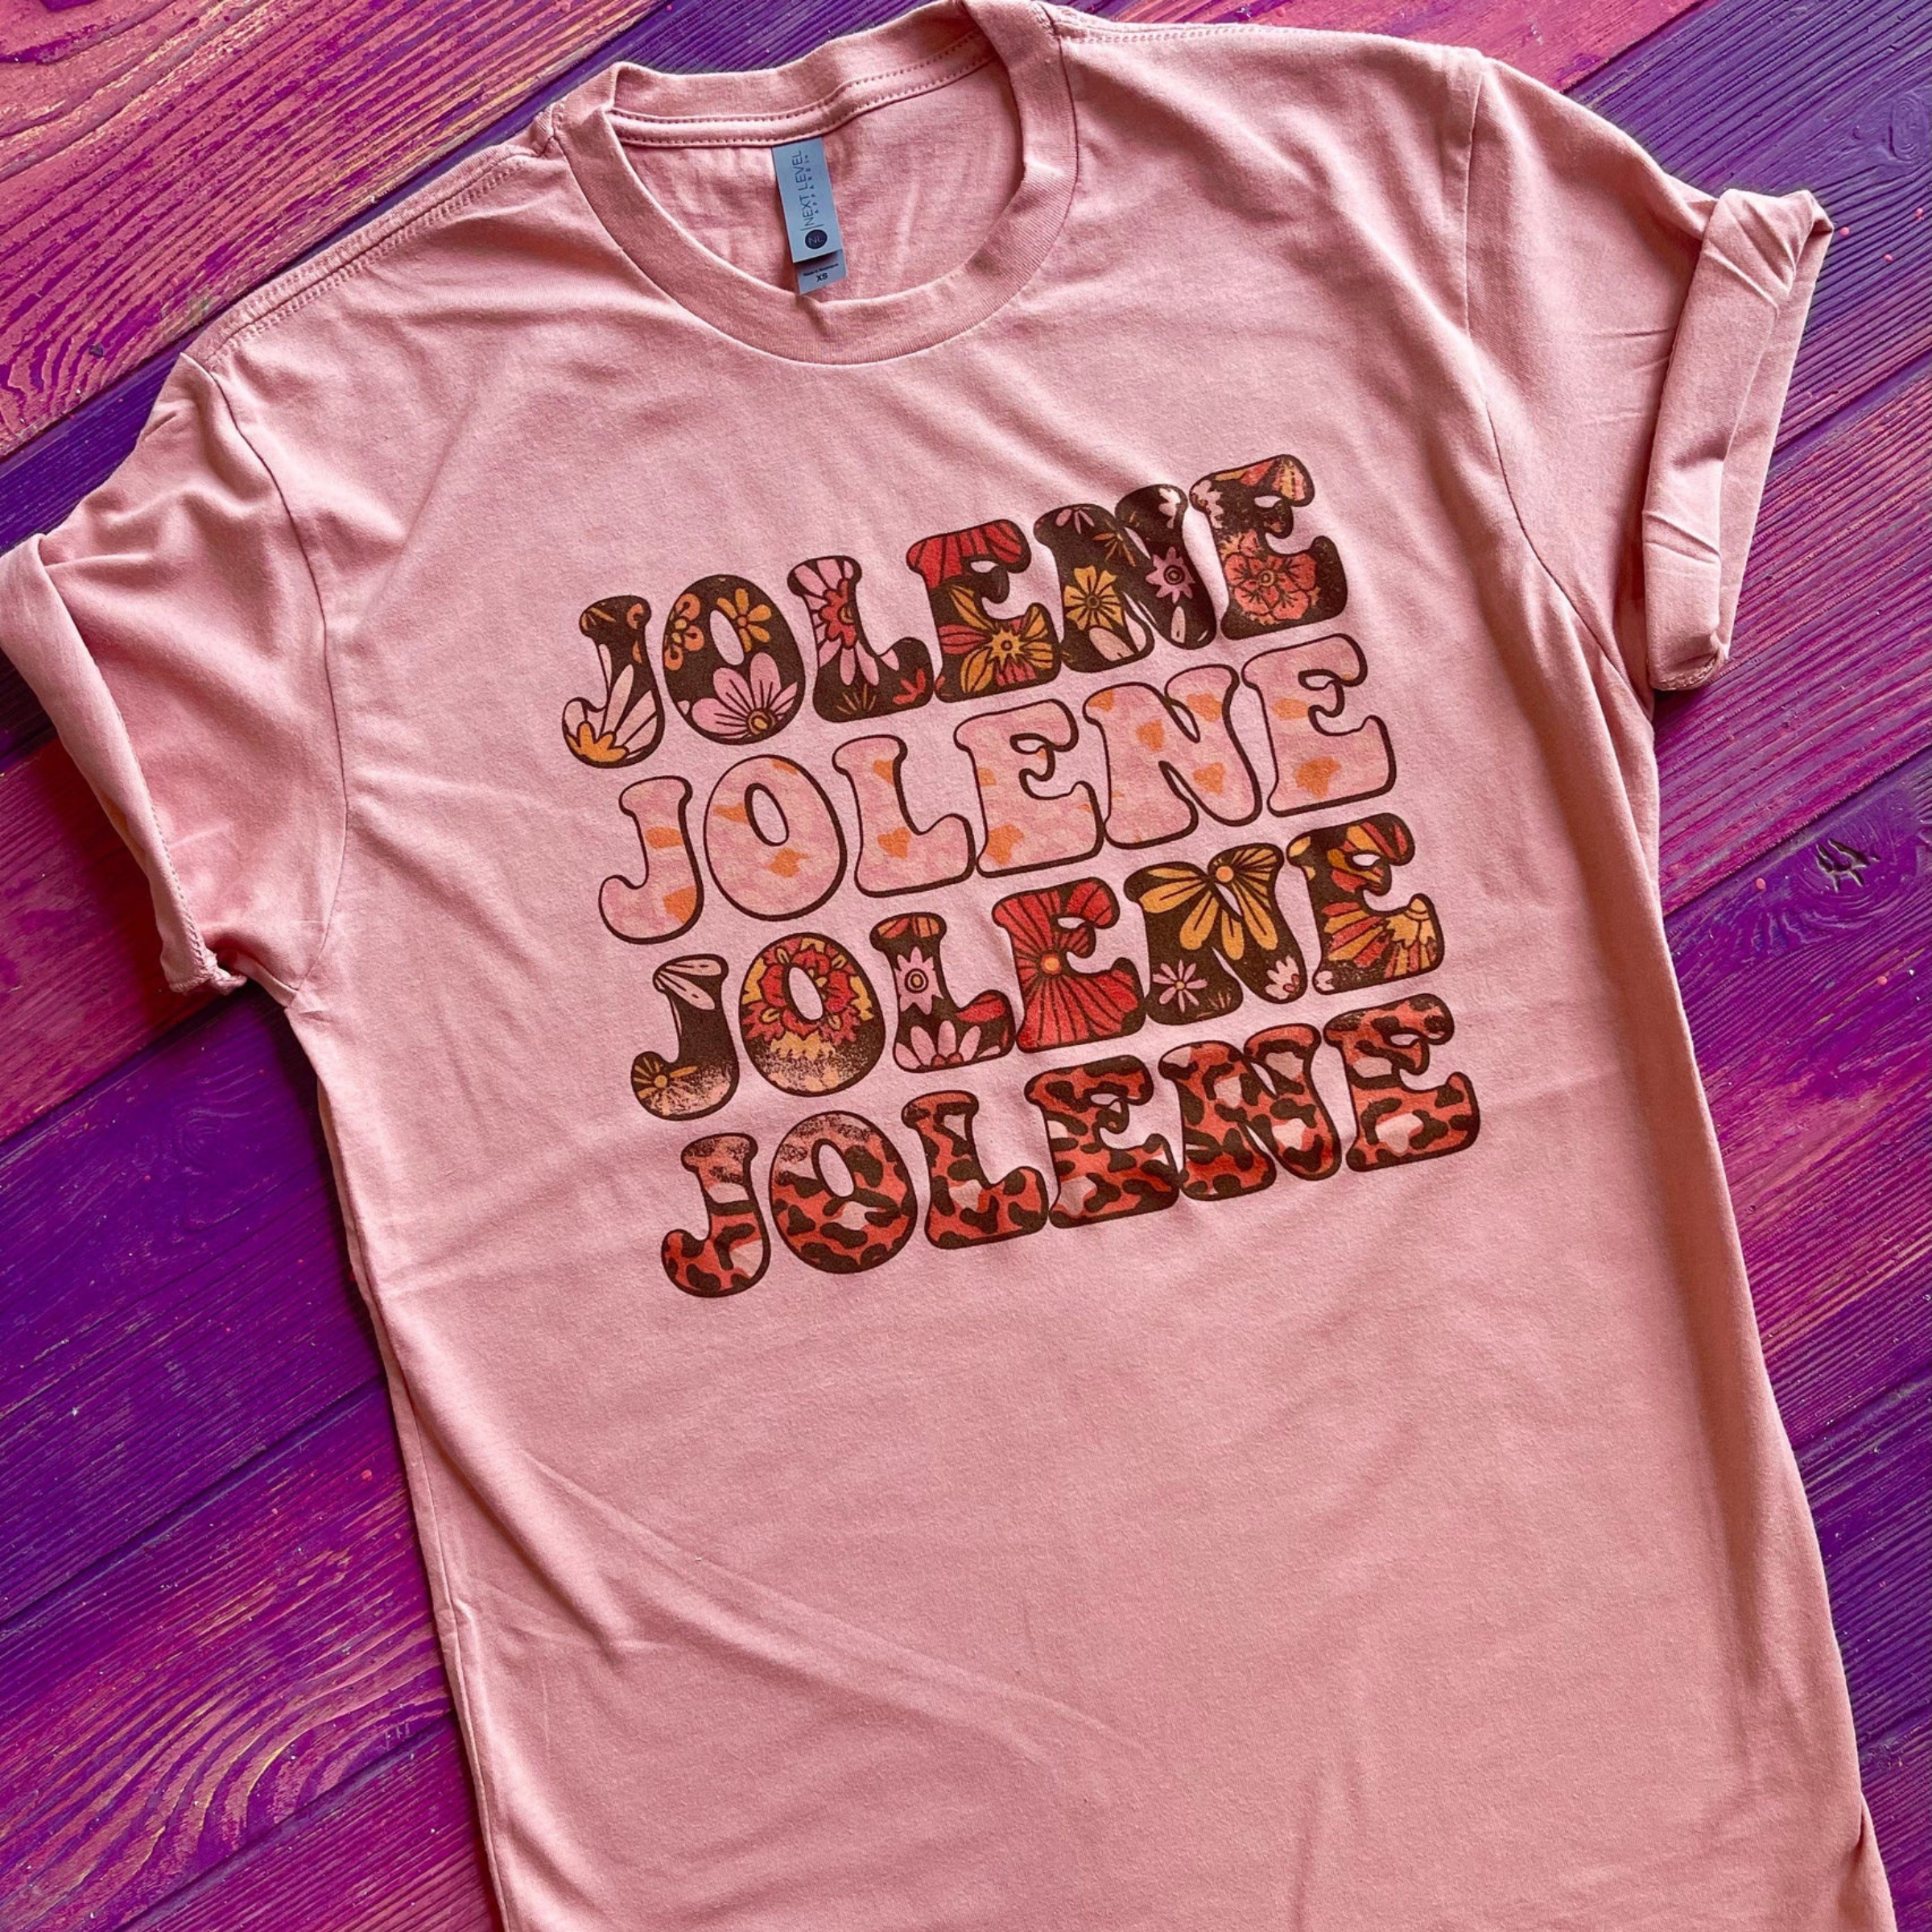 This desert rose pink graphic tee includes a crew neckline, short sleeves, and cute hand drawn design that says "JOLENE" in four rows. Inside of each "JOLENE" is a different print, such as floral or leopard. This tee is shown in this photo as a flat lay with rolled sleeves. 